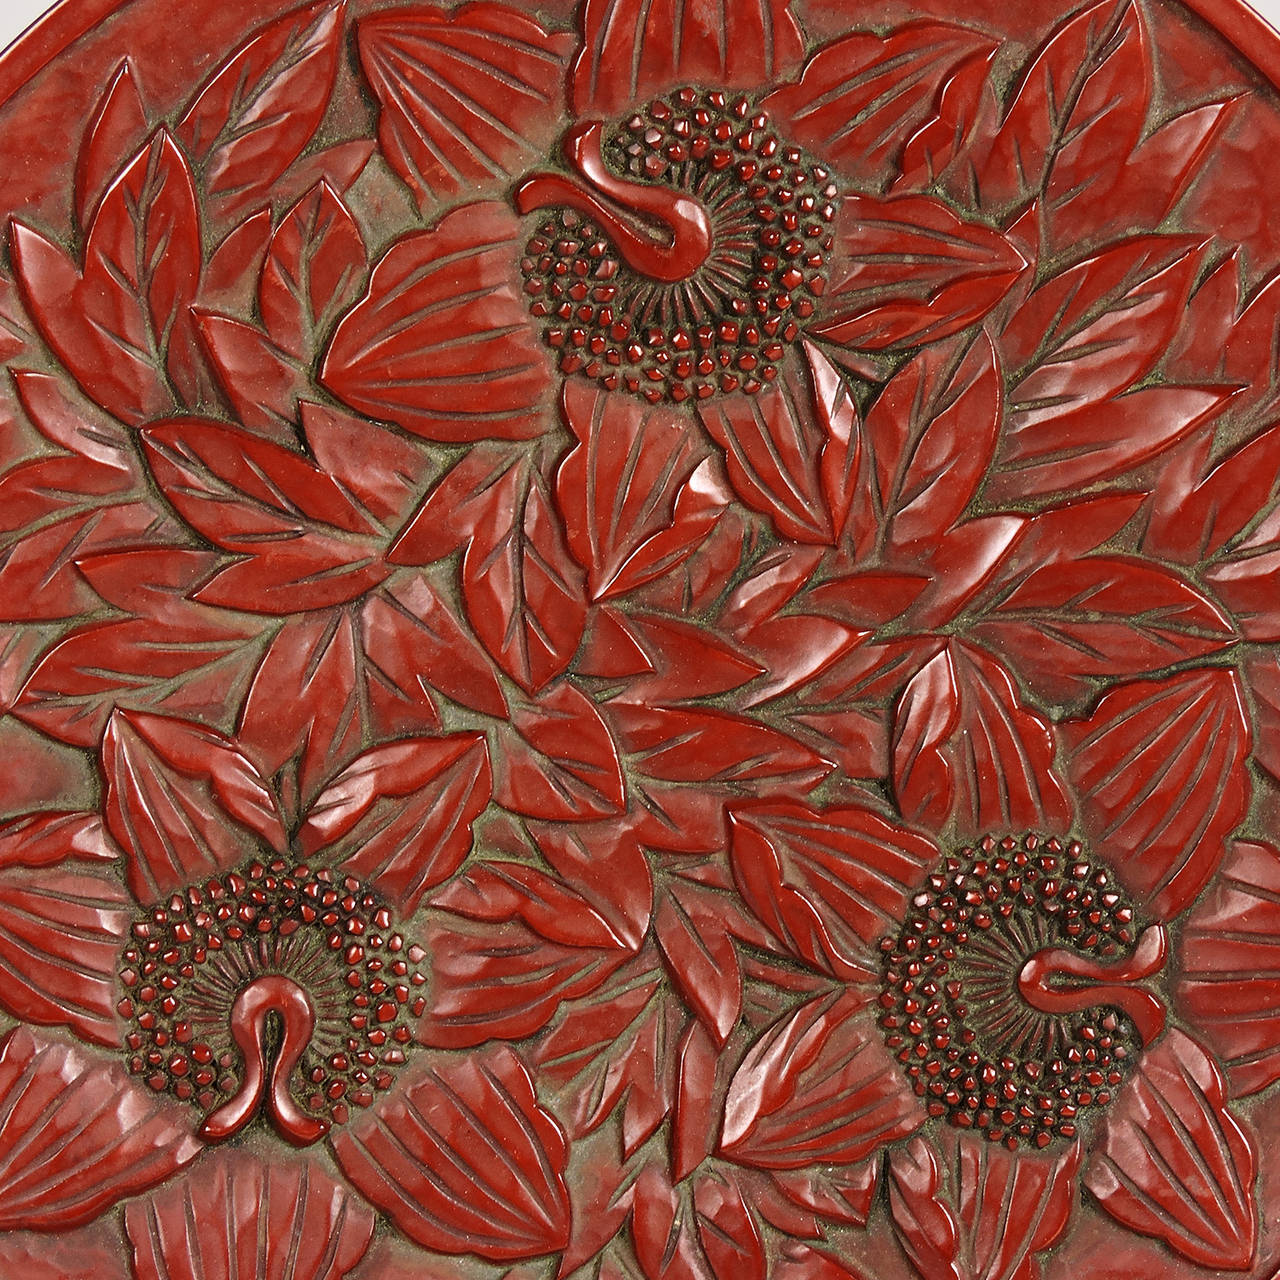 This lovely Japanese round red lacquer plate with hand-carved blossoms and leaves was crafted in a technique known as Kamakura-bori and dates to the early 20th century. Measures: Diameter 9 1/2 inches.